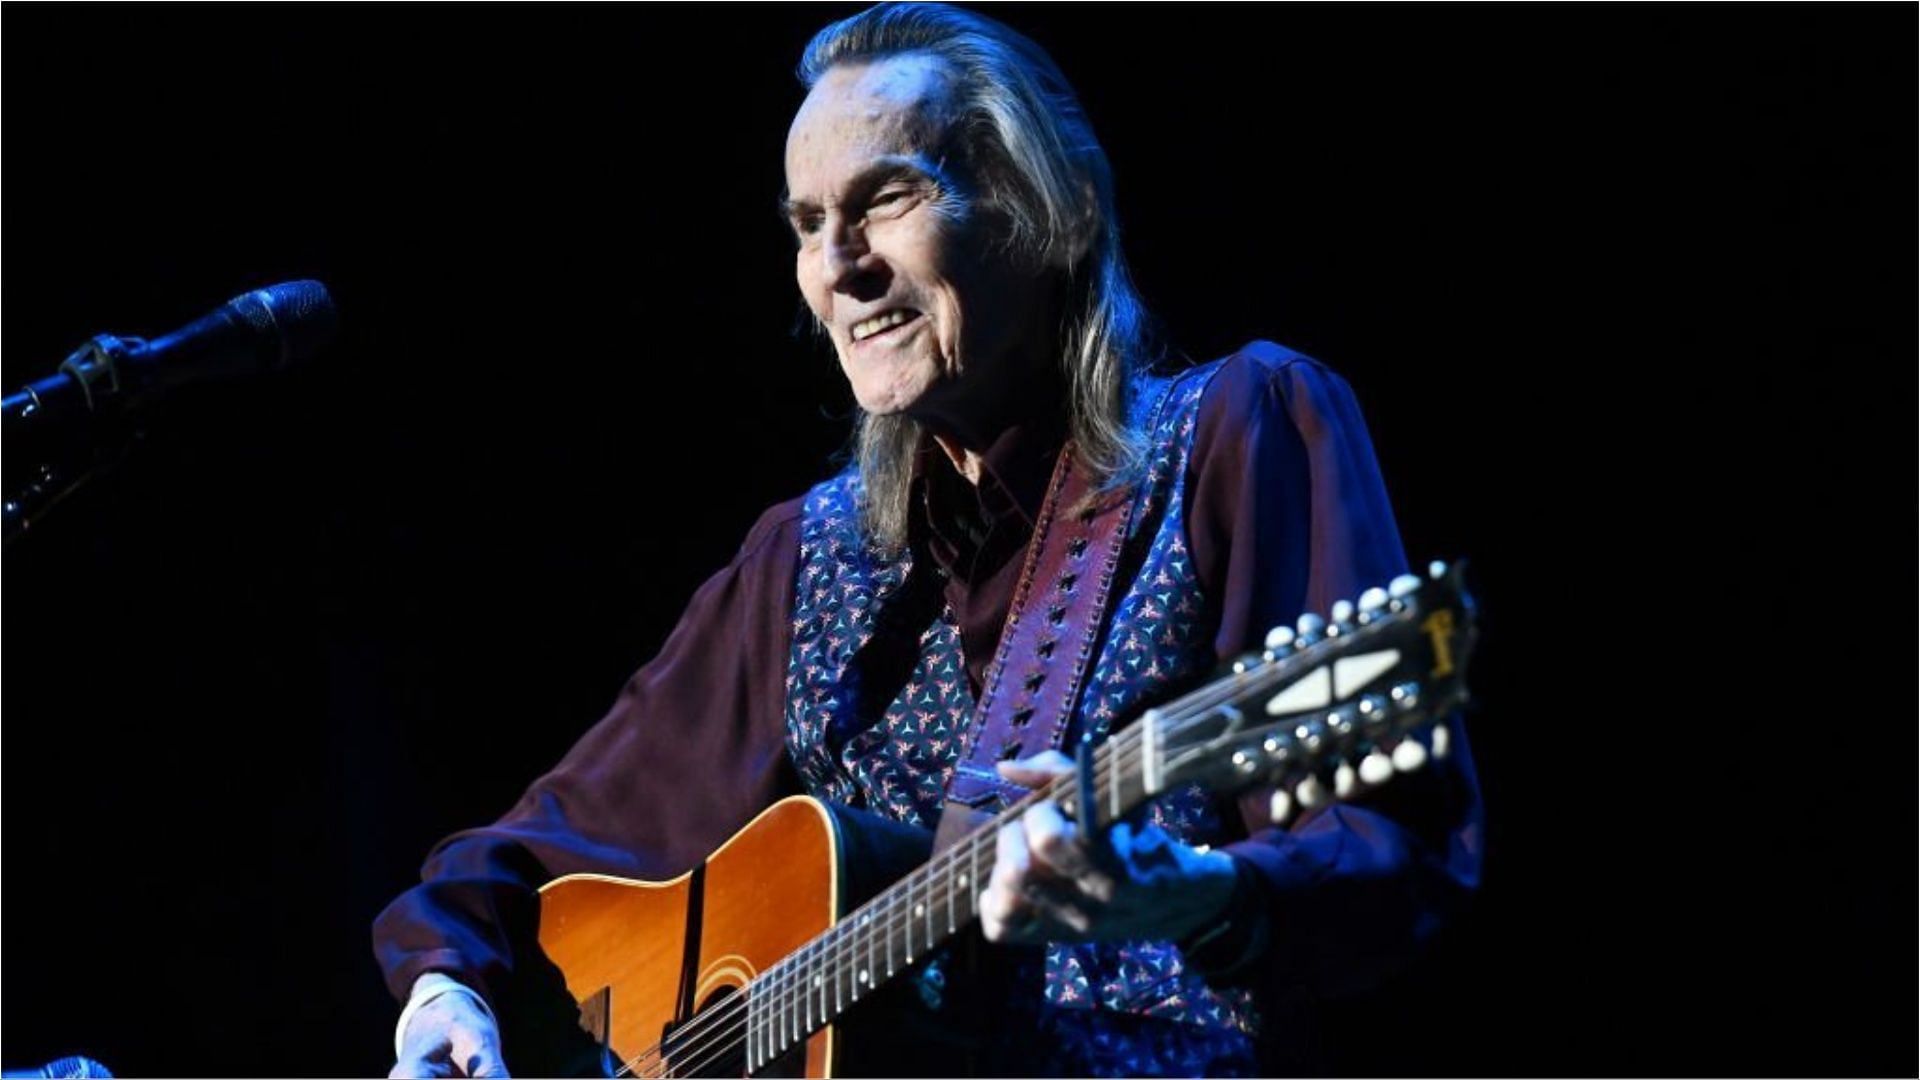 Gordon Lightfoot has earned a lot from his career in the music industry (Image via Scott Dudelson/Getty Images)